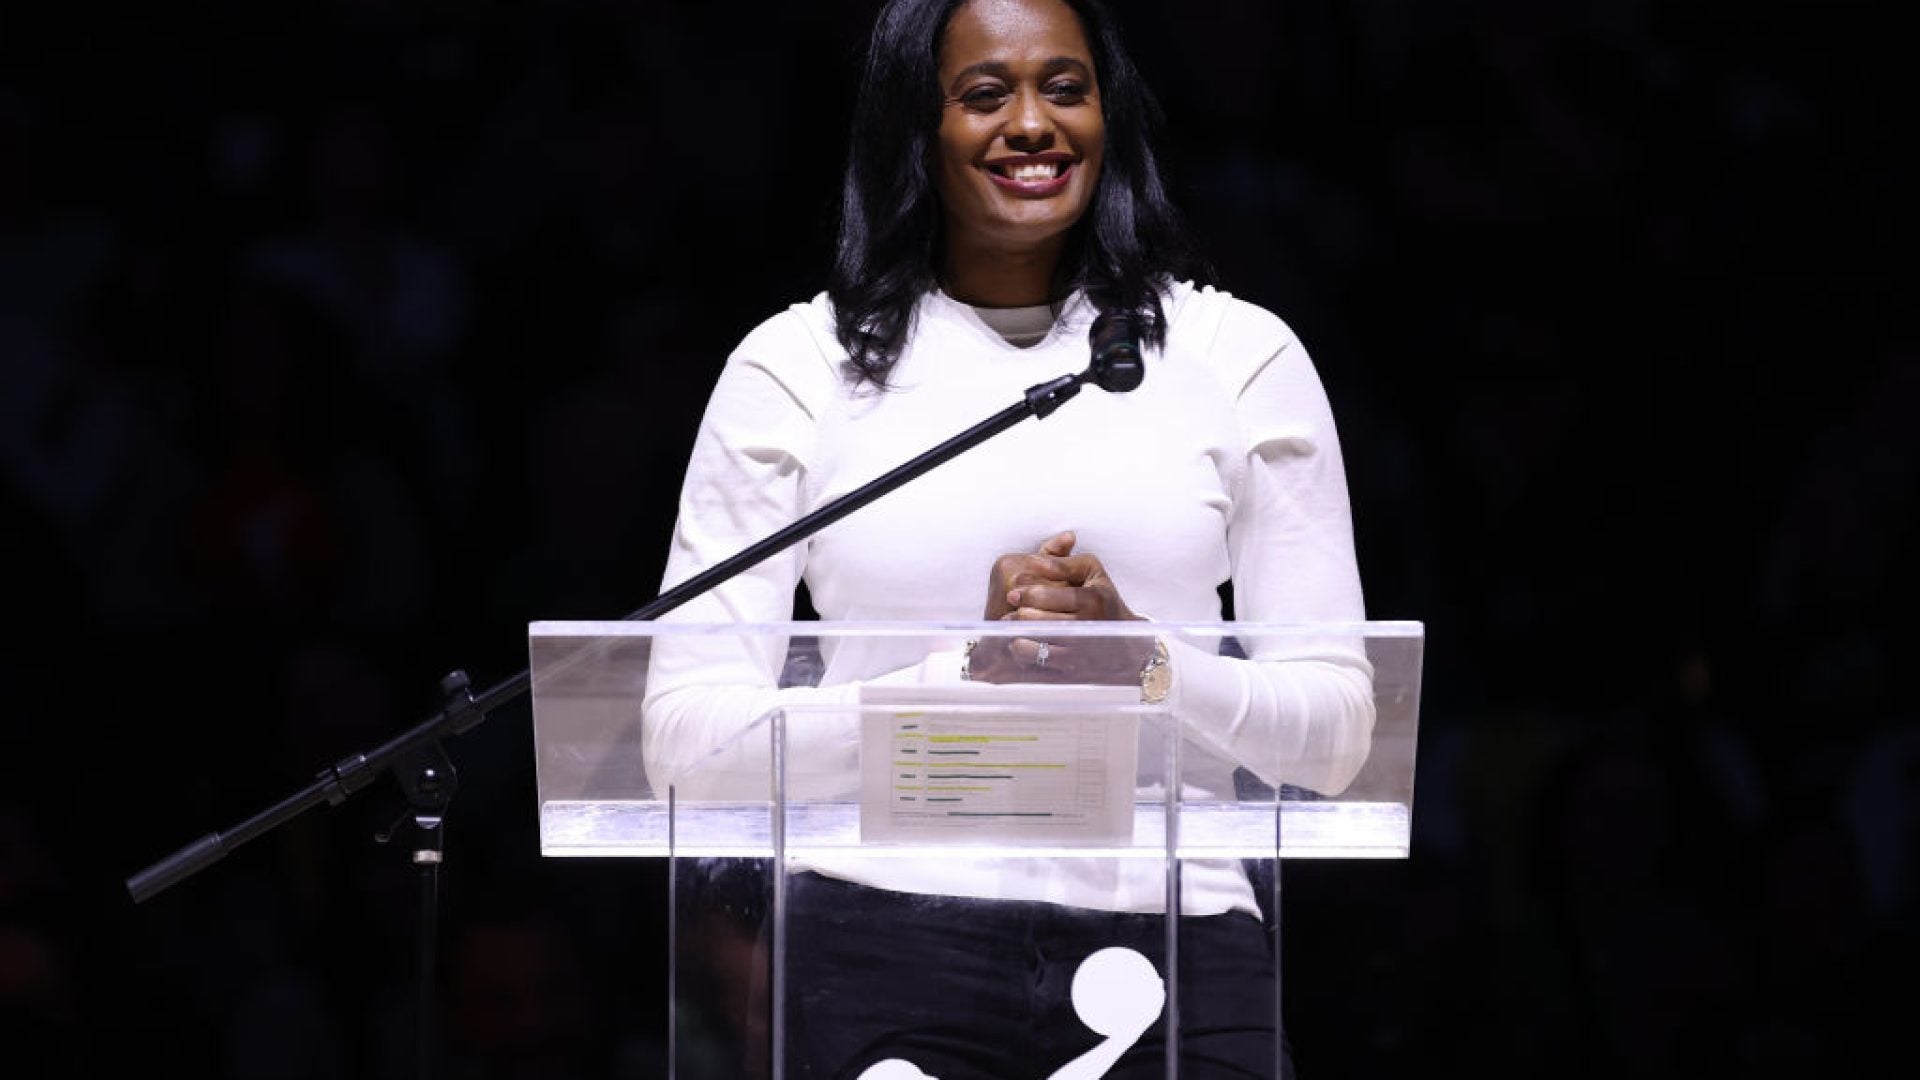 Meet The Highest Ranking Black Woman Exec In The NBA